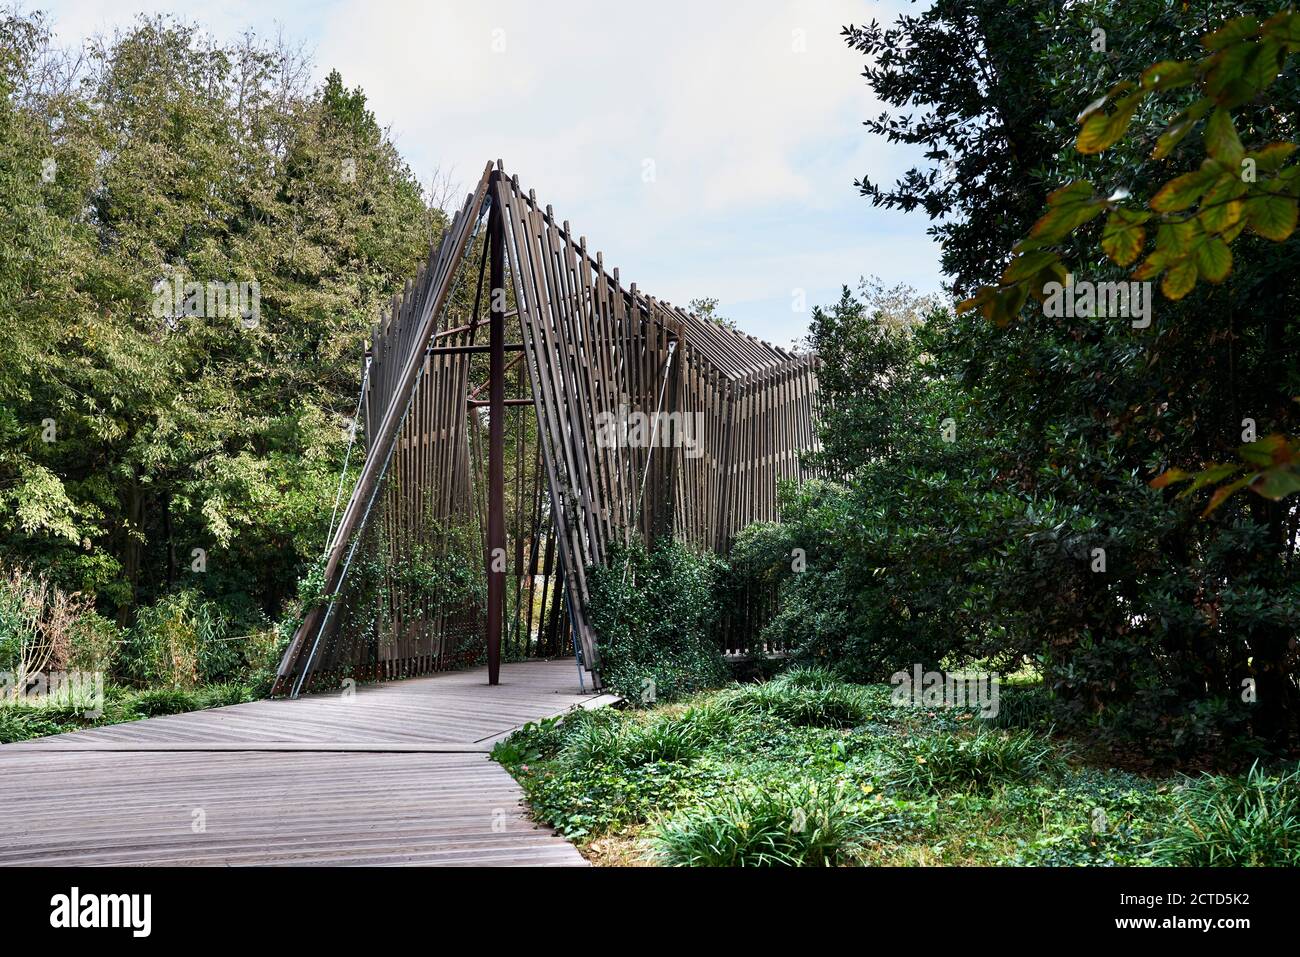 Sanctuary Chapel for Vatican Pavilion at Venice Biennale 2018. tensegrity structure which is made up of steel masts and cross arms, braced by prestressed steel cables and small inclined circular hollow sections. Stock Photo